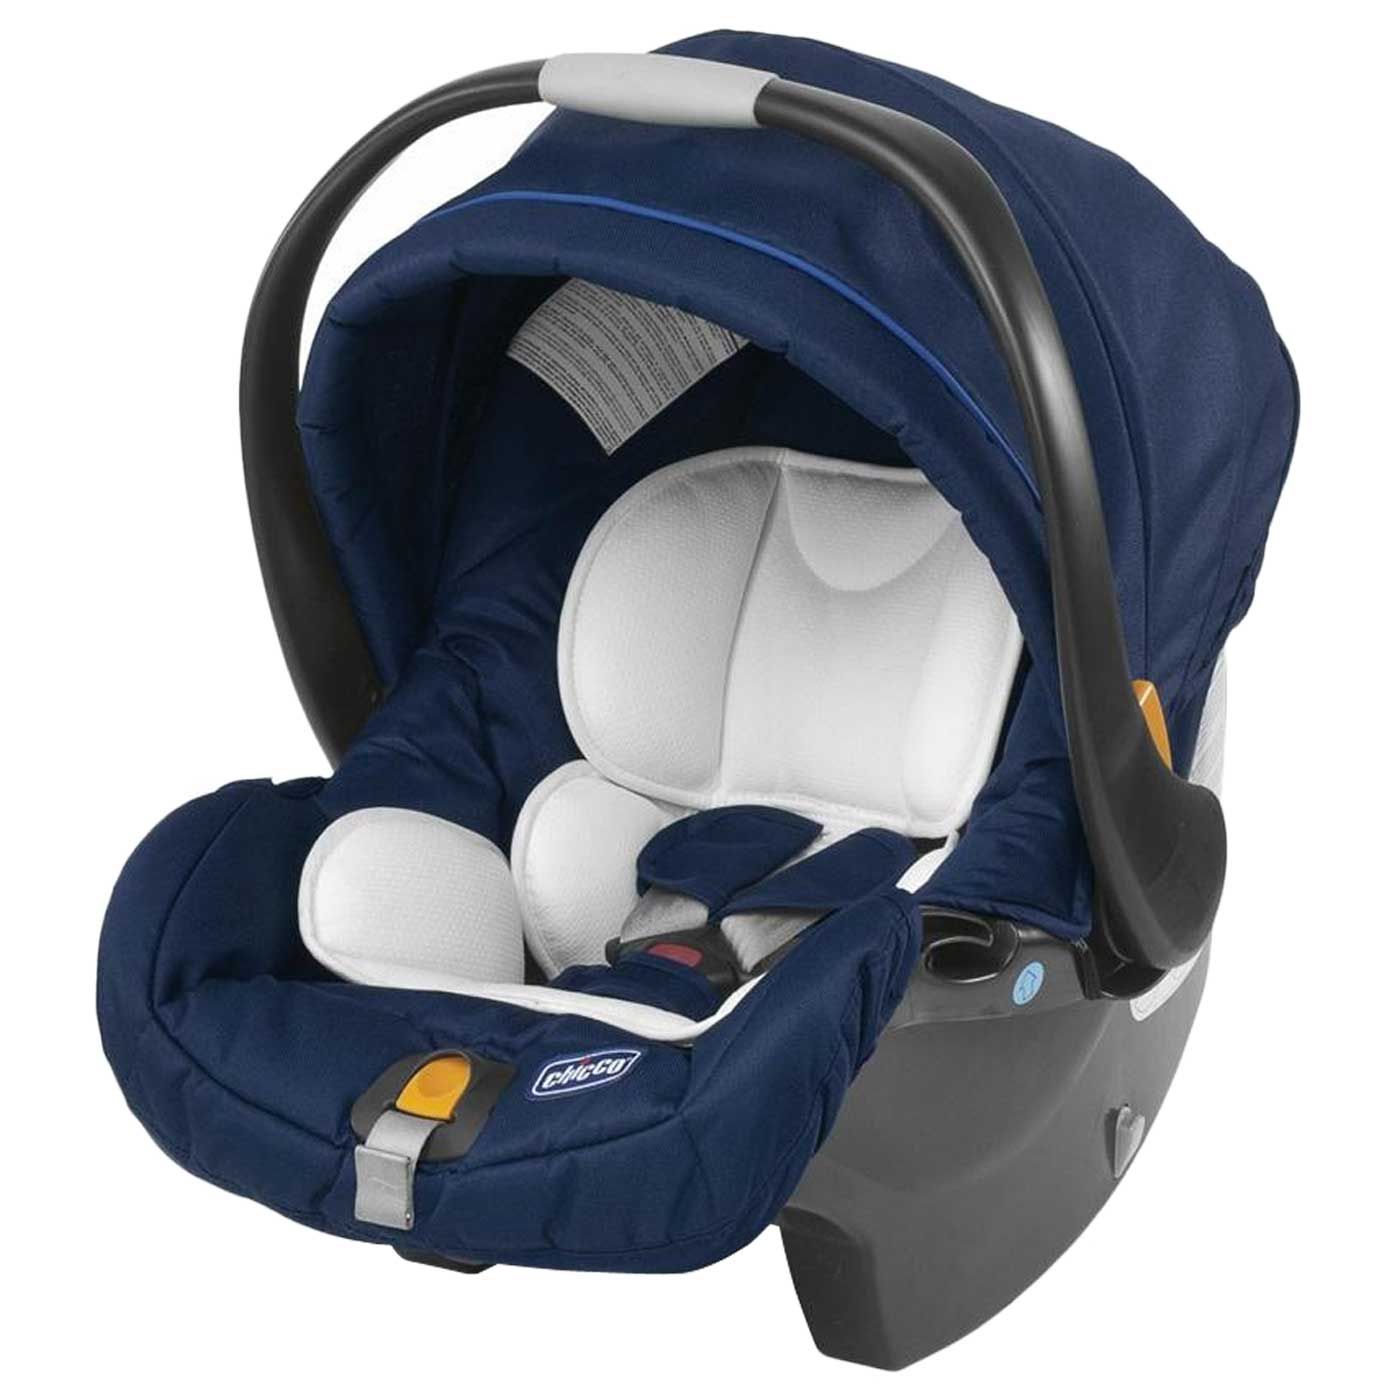 Chicco Keyfit Carseat - Blue - 2